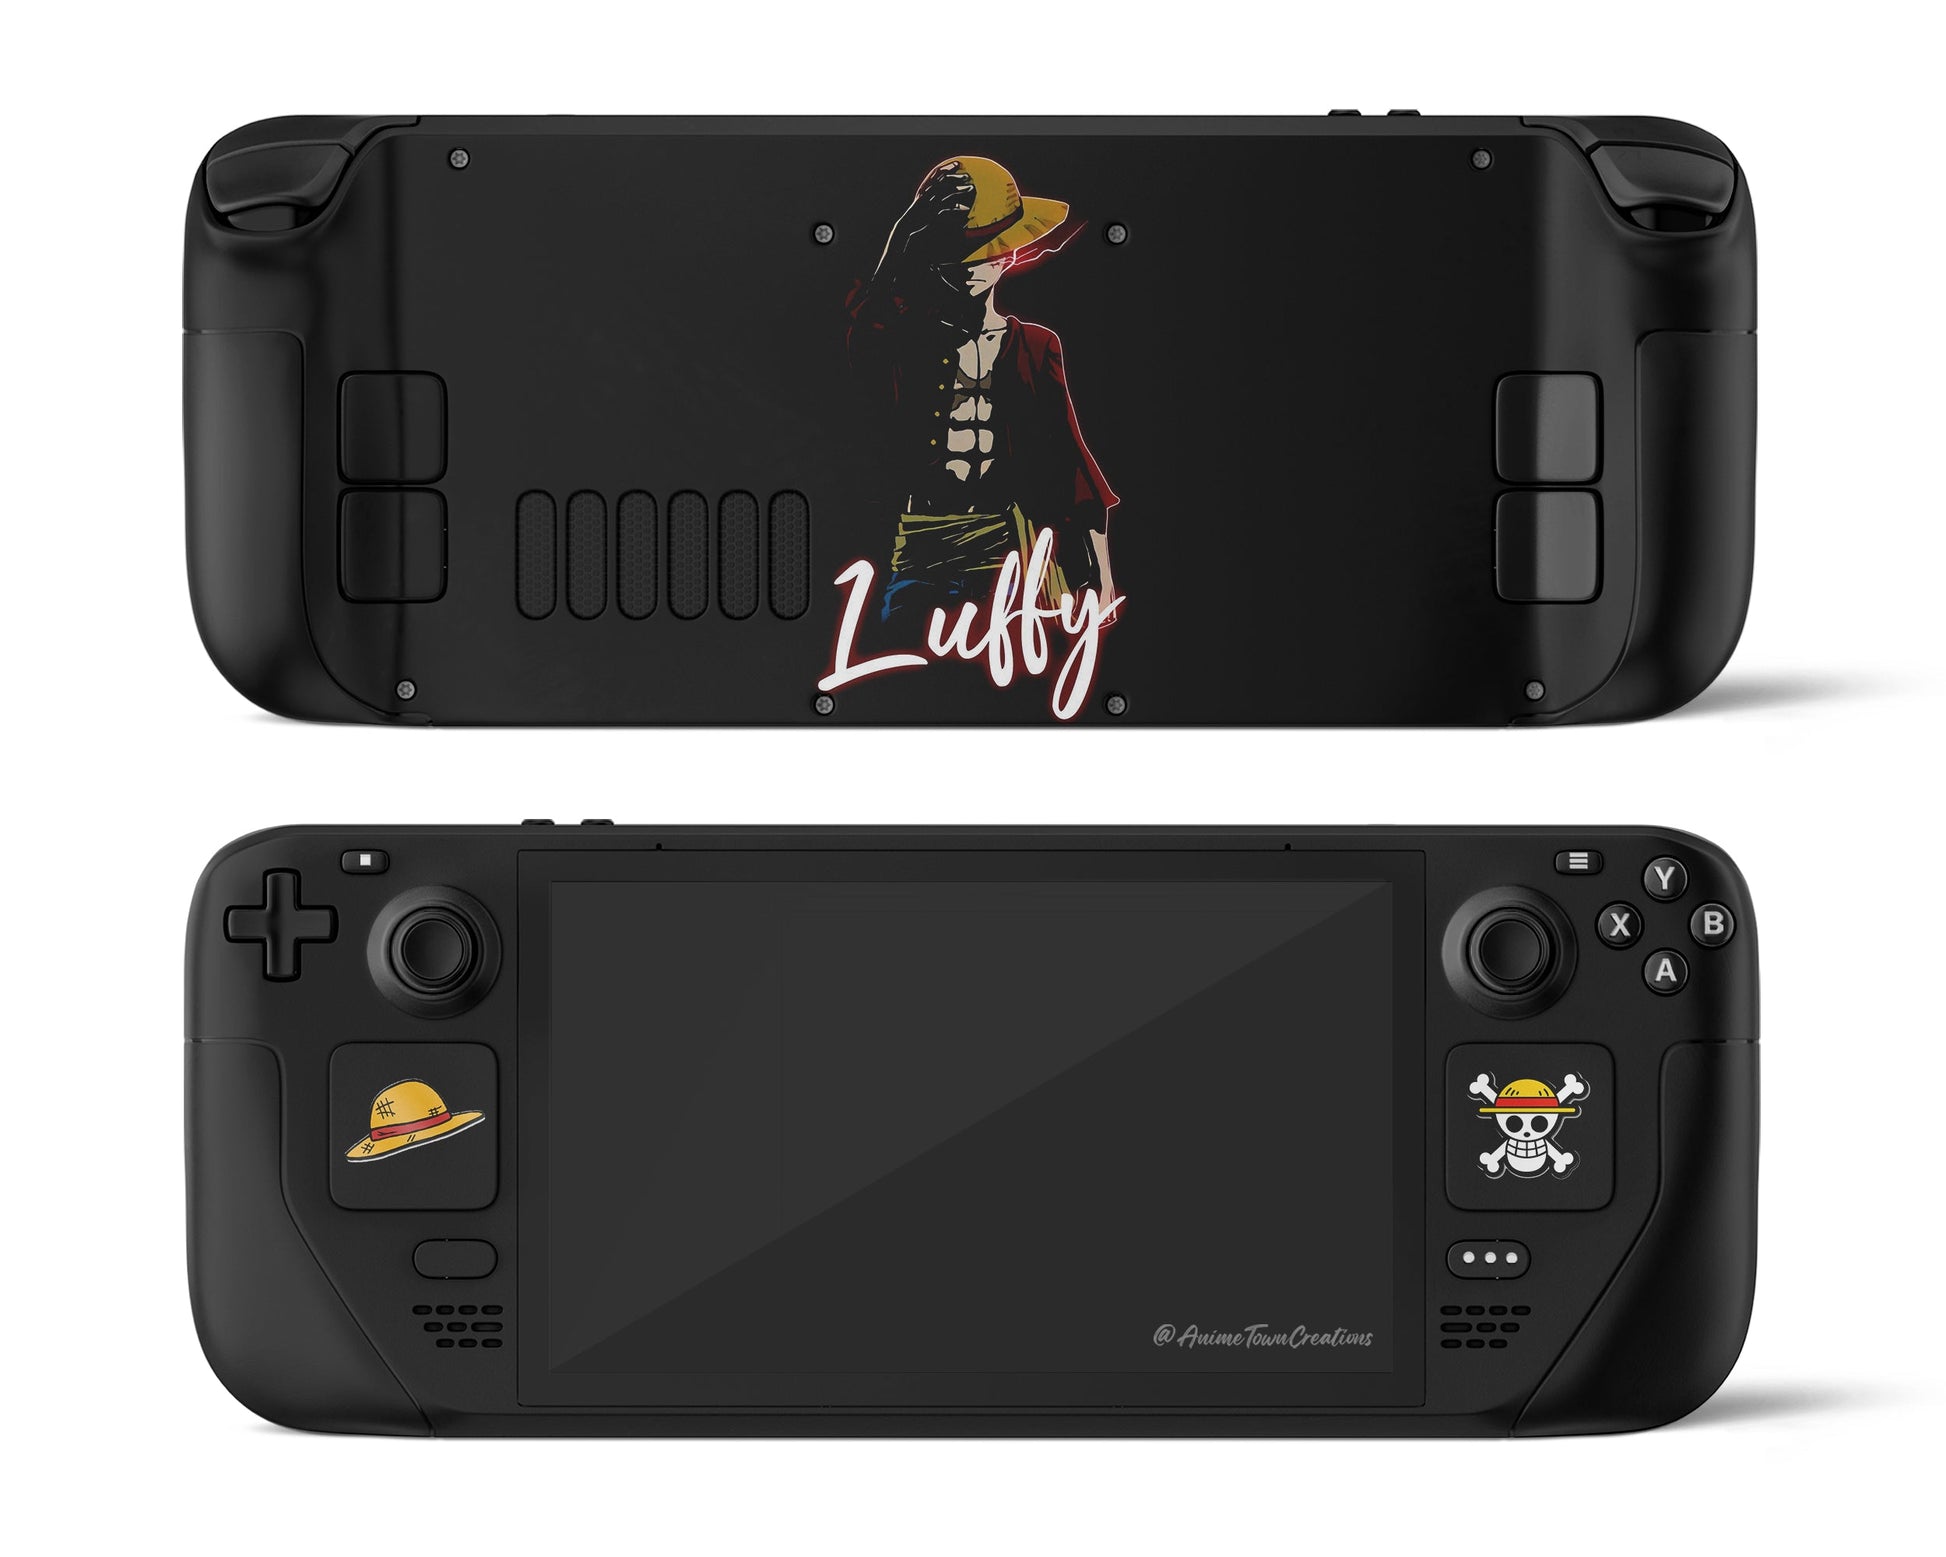 One Piece Luffy Manga PS5 PS5 Skin – Anime Town Creations